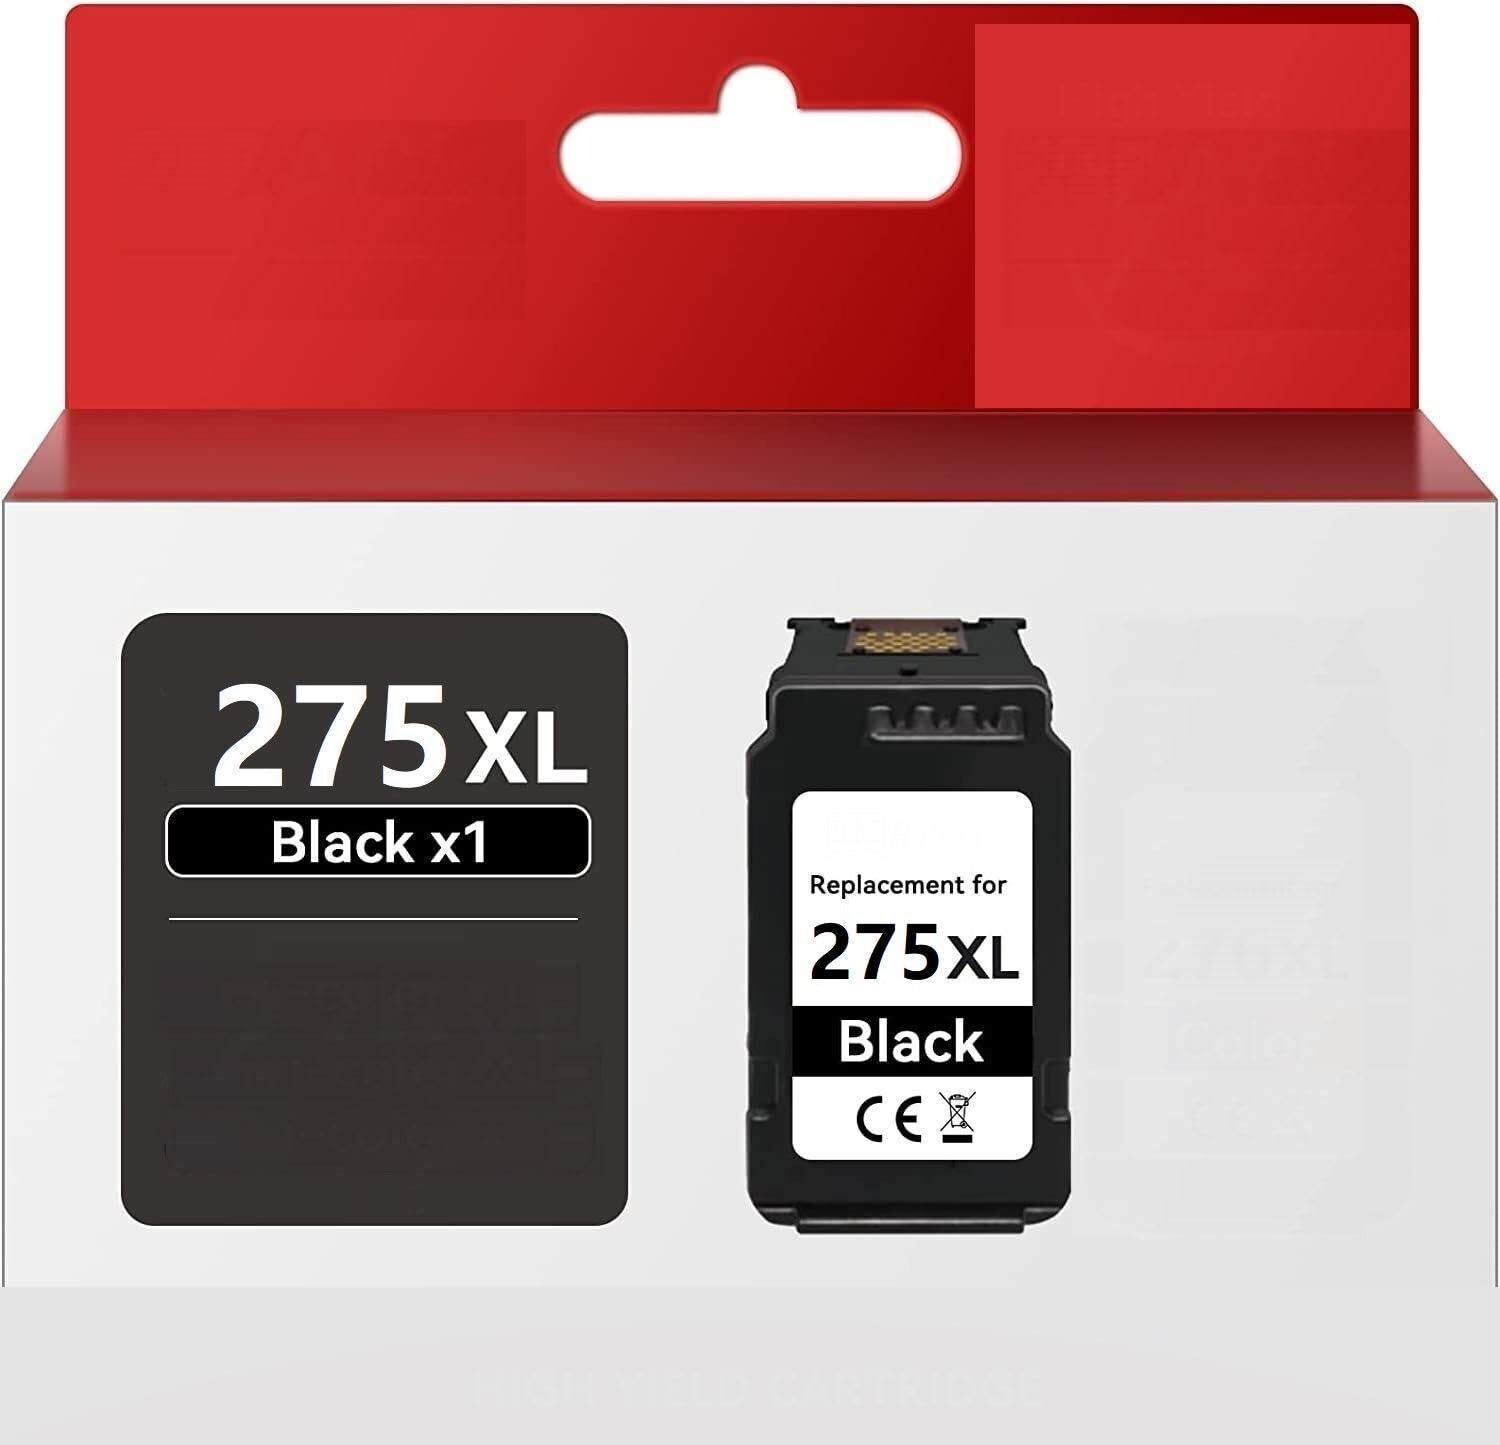 275XL Ink Cartridge for Canon PG-275 for PIXMA TR4720, TS3520, TS3522